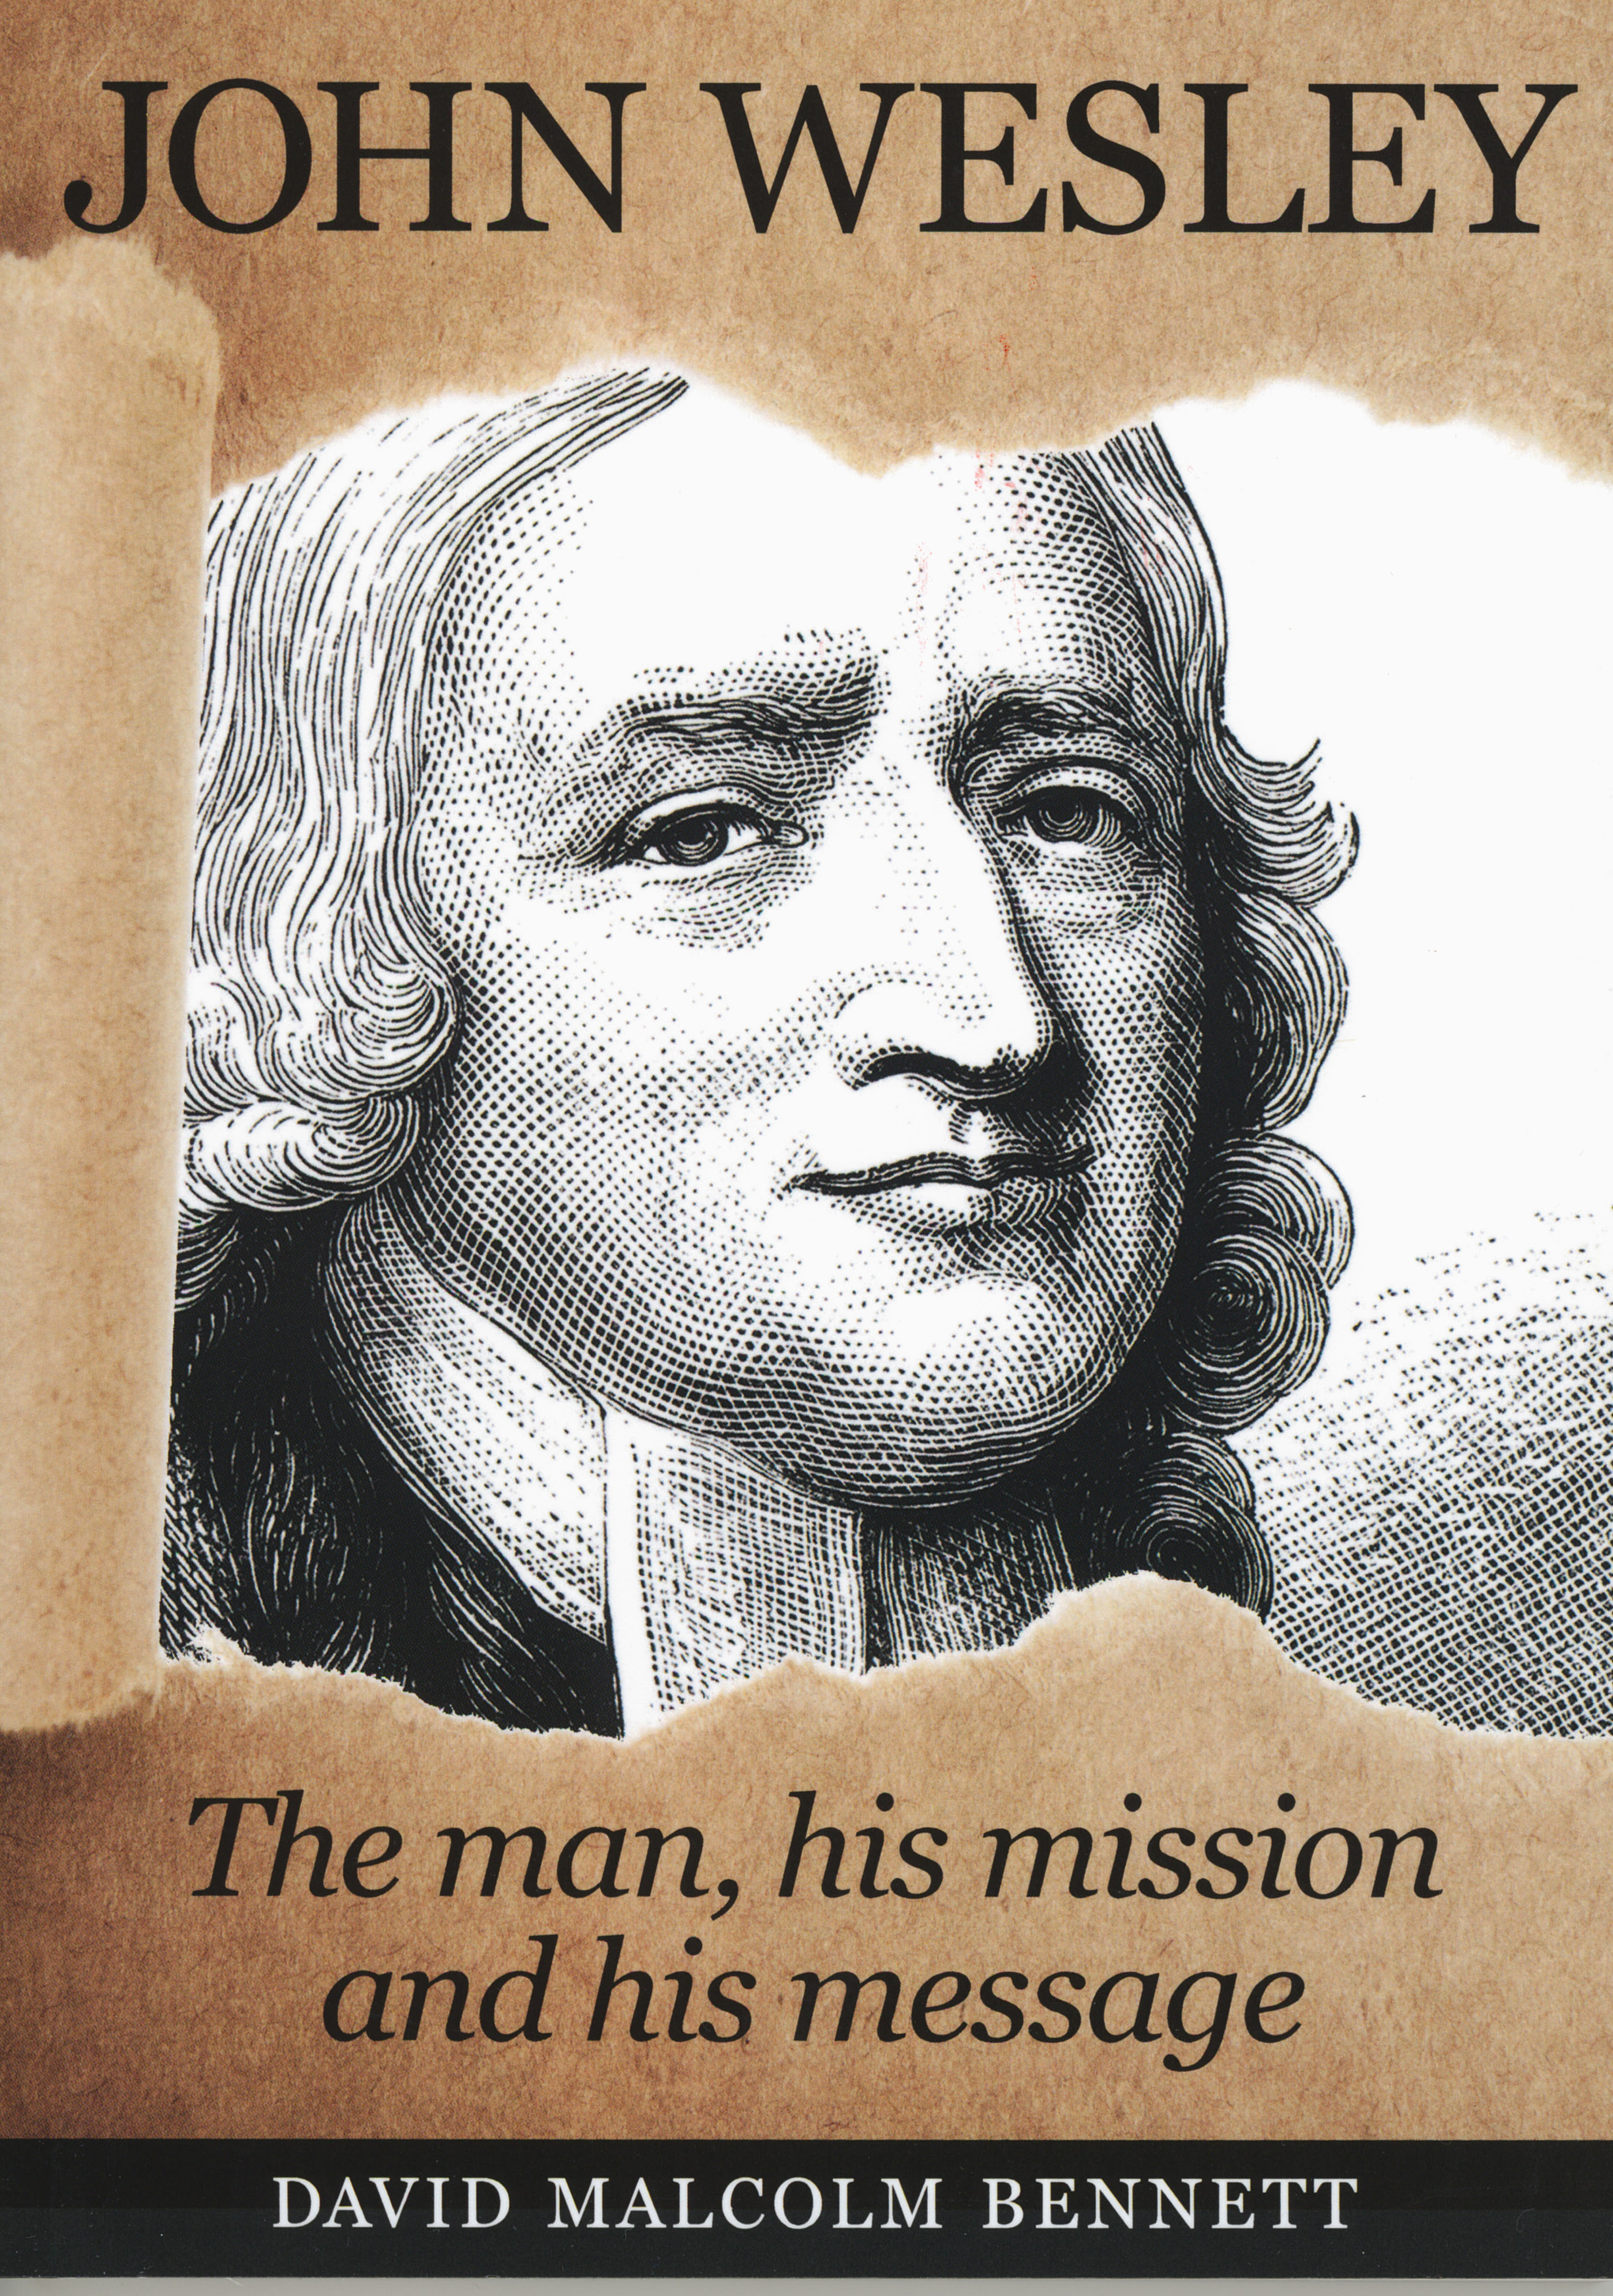 John Wesley: The man, his mission and his message by David Malcolm Bennett 108-9781925139273